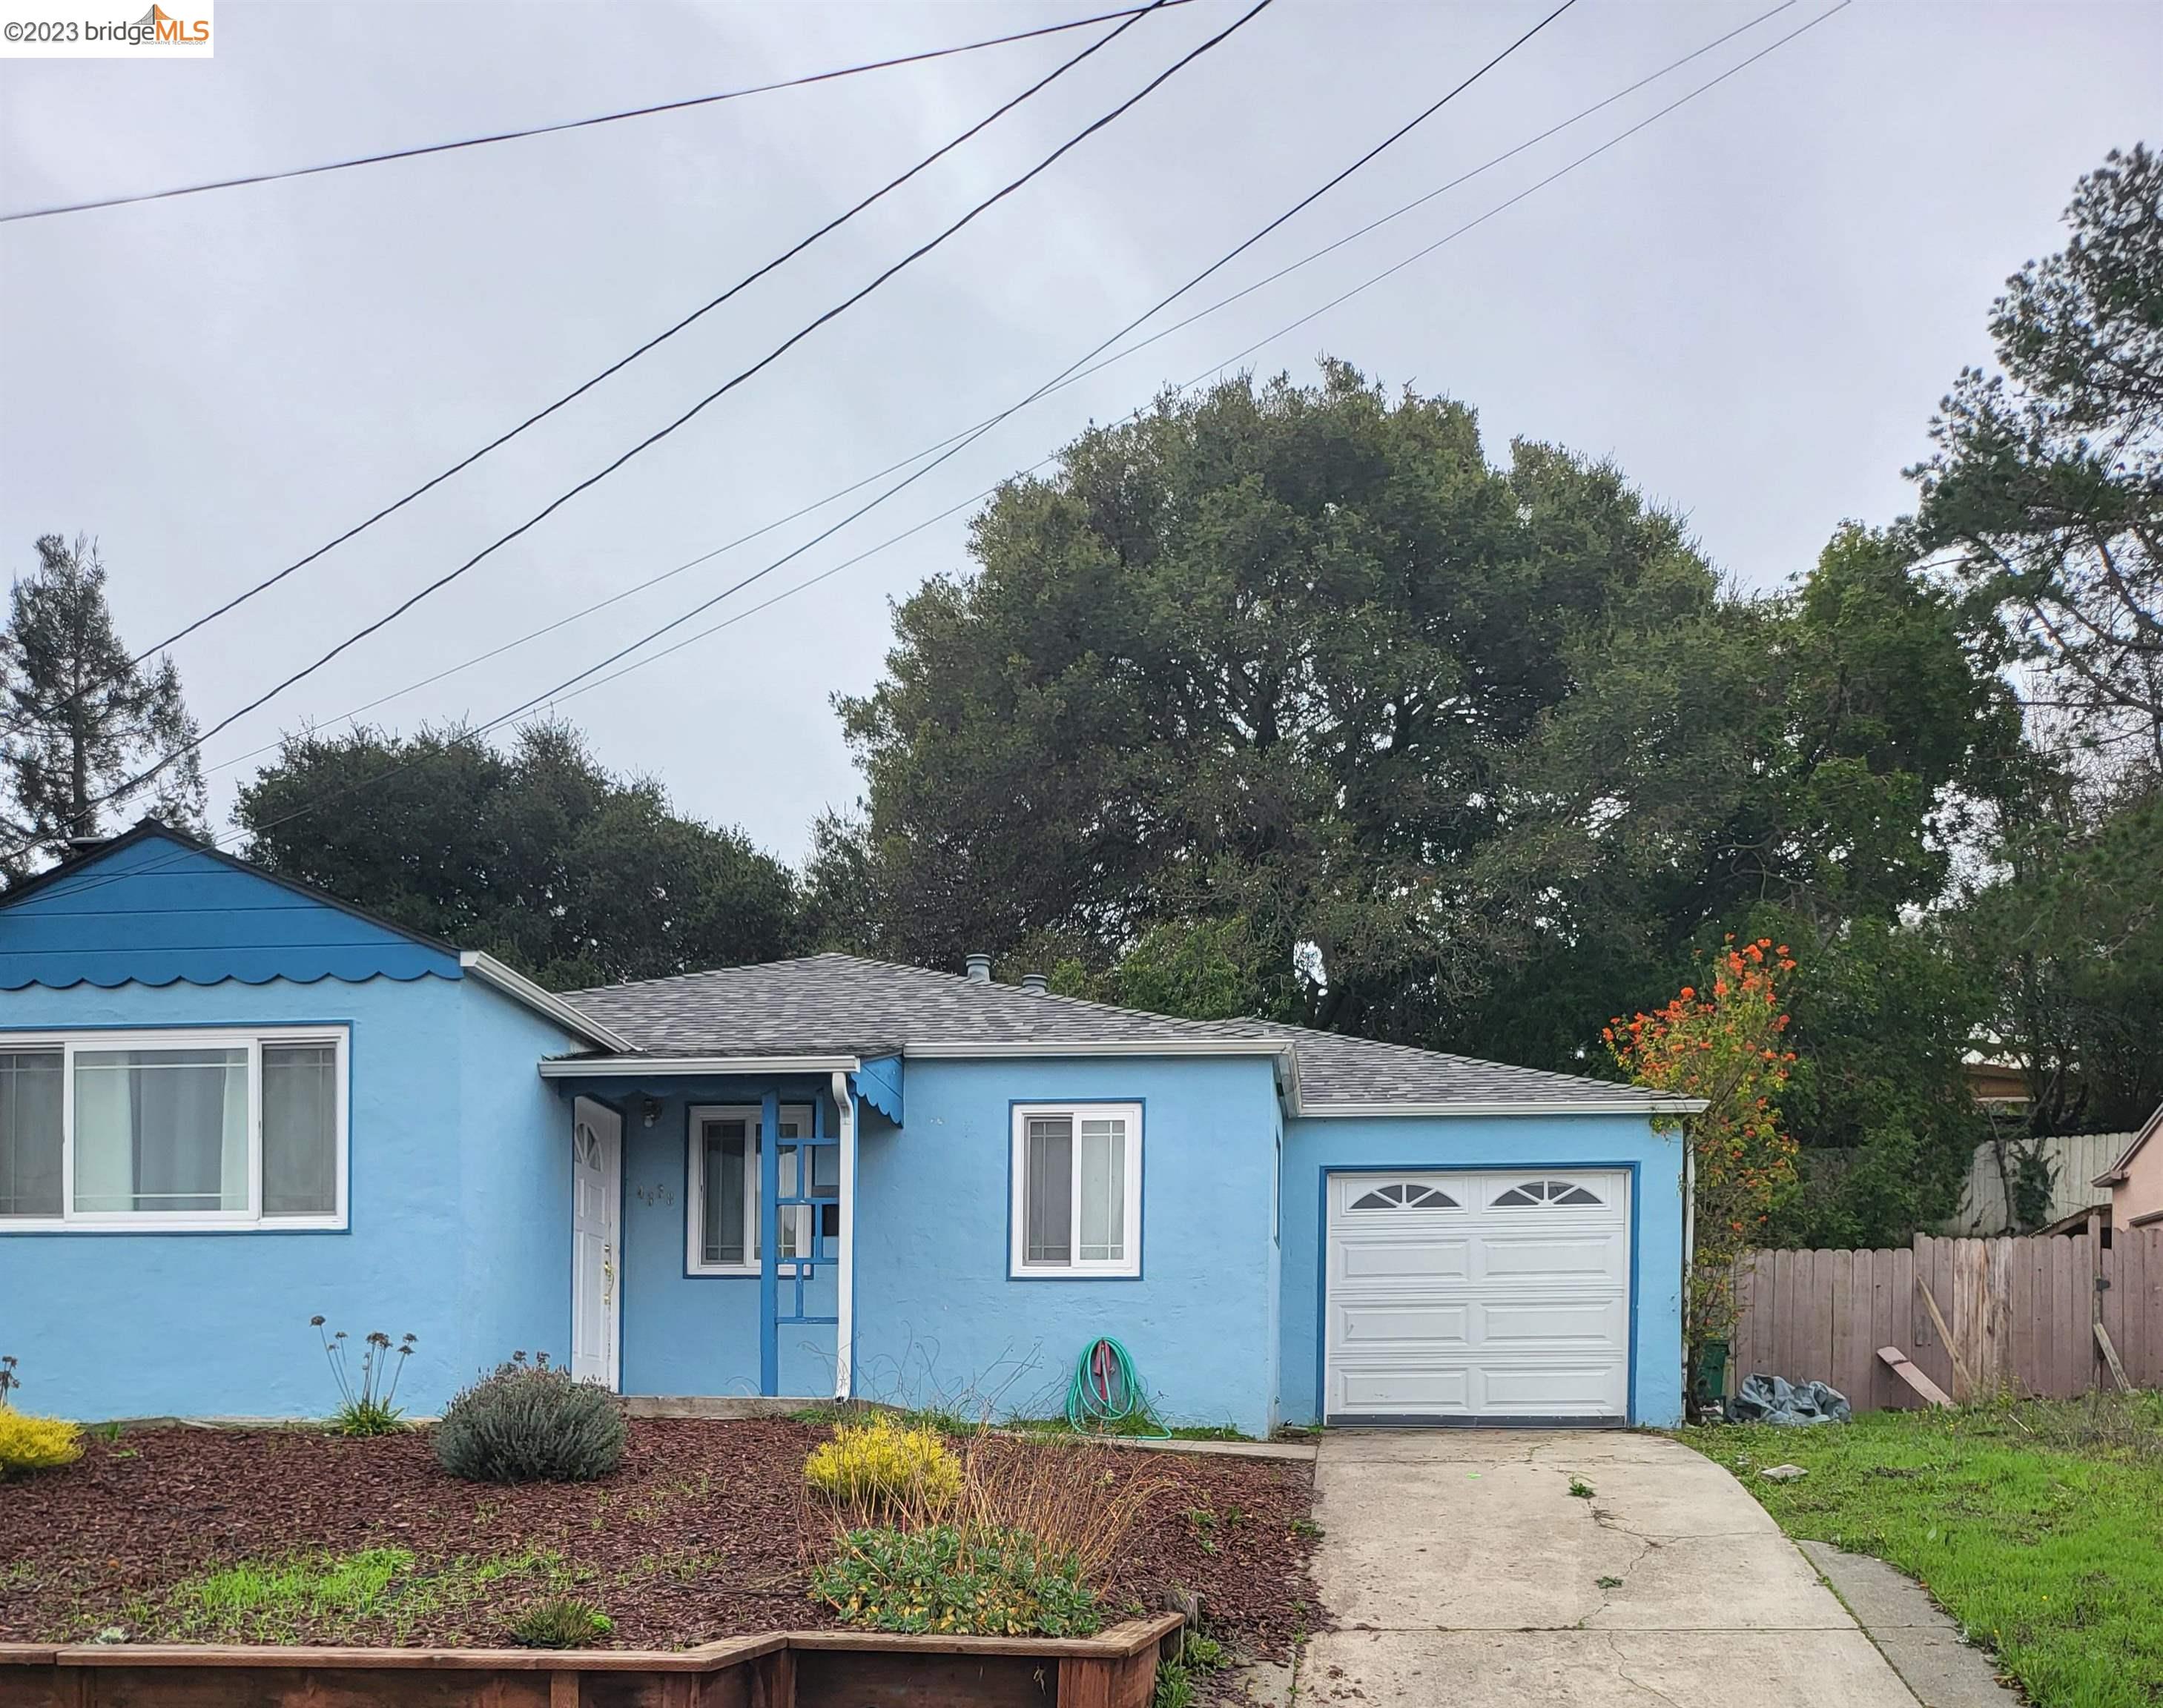 Charming 3 bedroom 1 bath nestled in country-like El Sobrante. Home offers laminate floors with carpet in bedrooms. Spacious backyard great to unwind after a long day or to garden on the weekends.